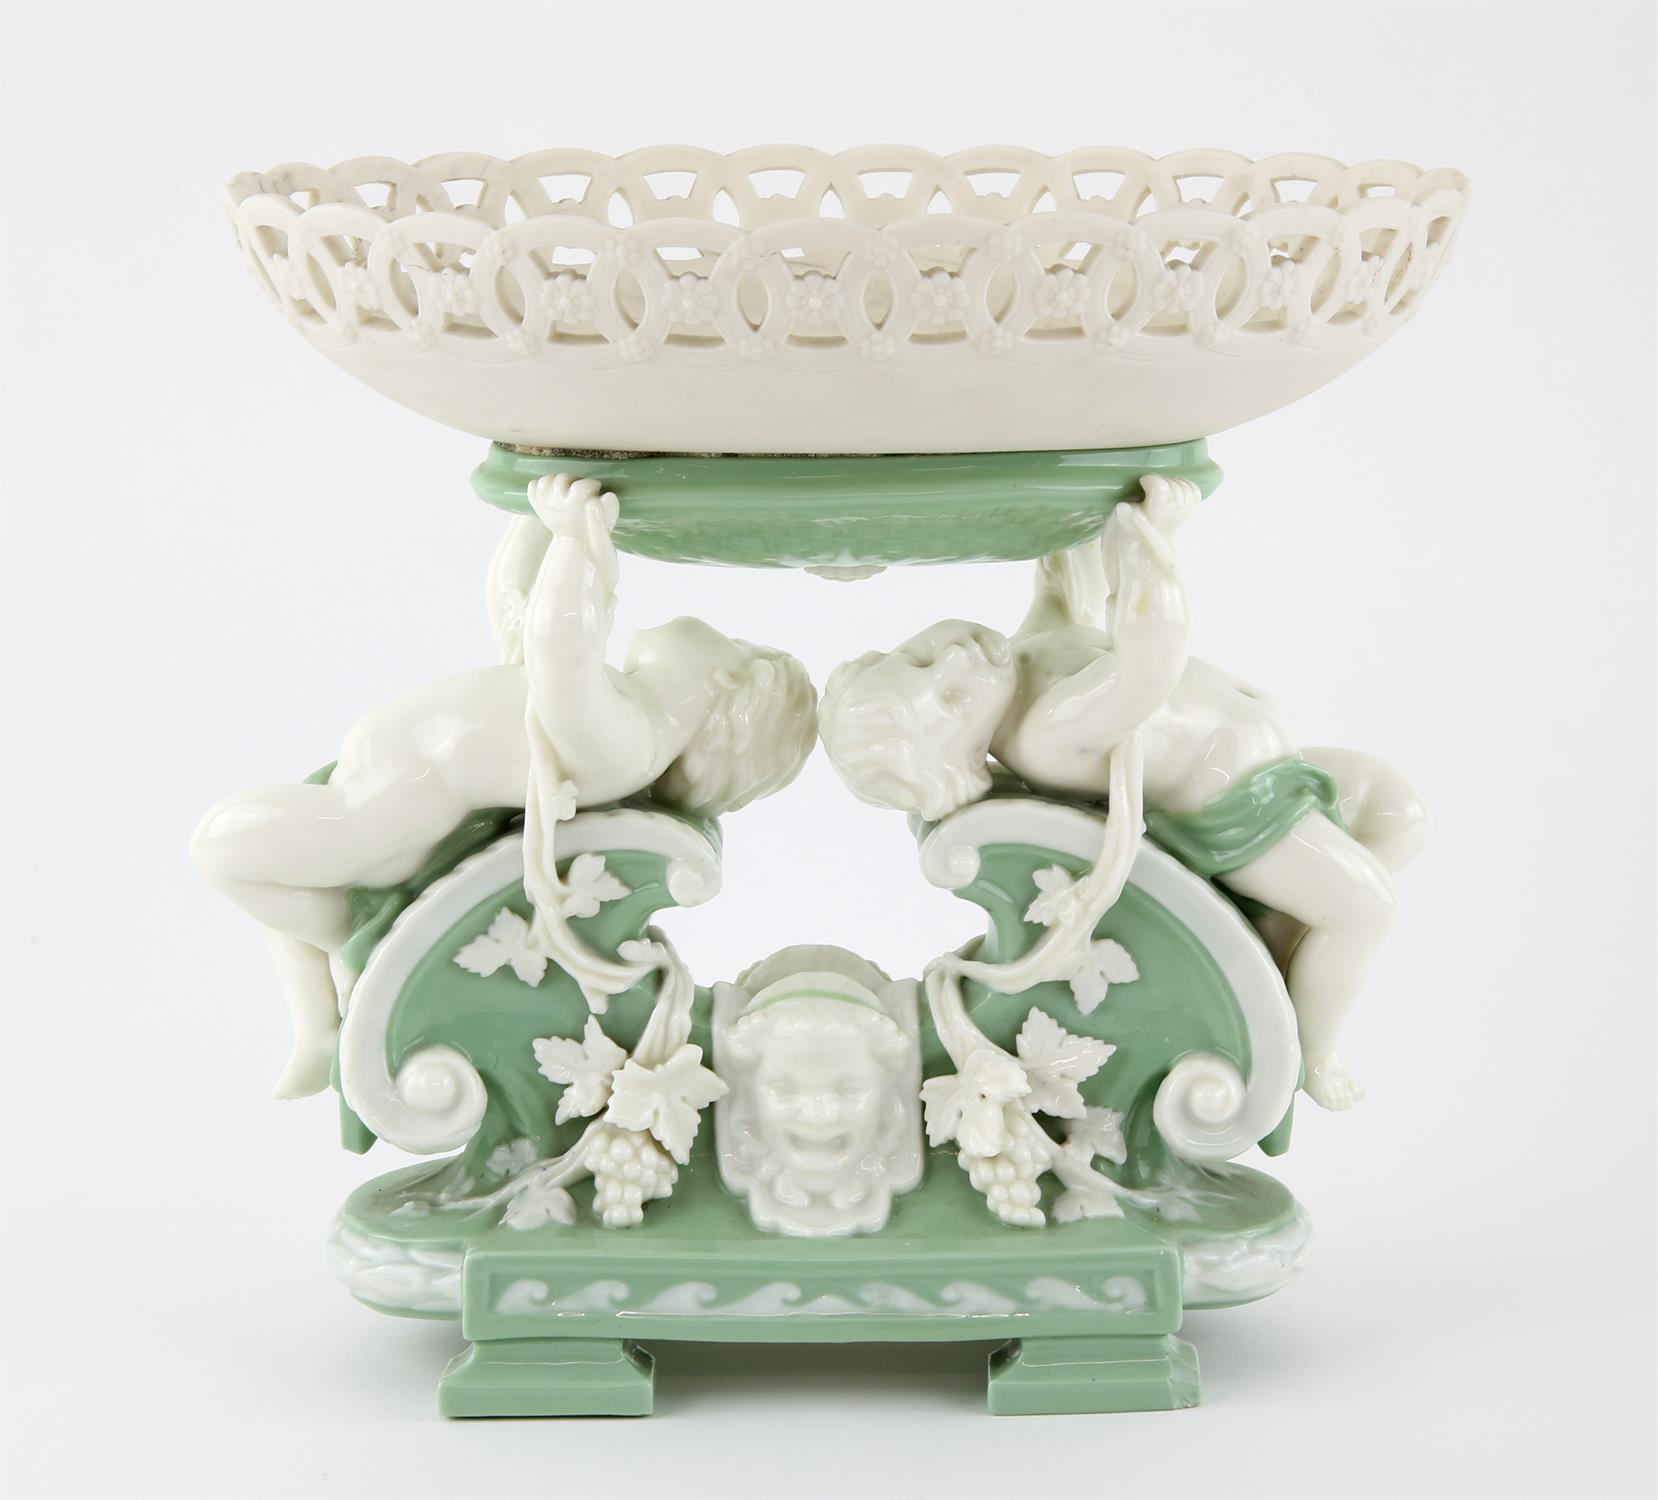 Mintons pale green and white glazed figural centrepiece, two putti holding up an oval pierced